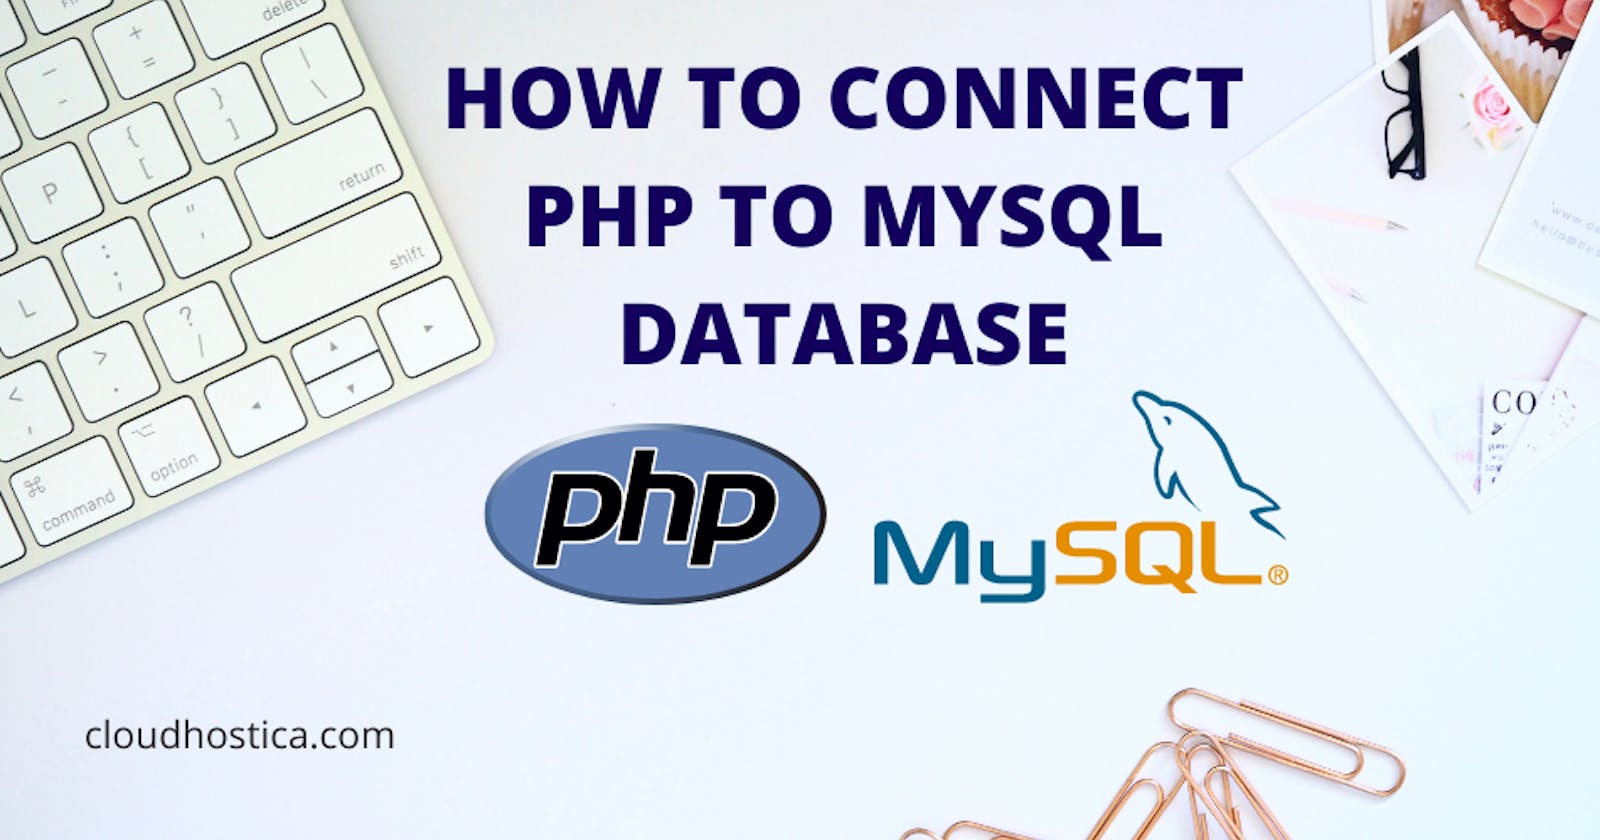 How to Connect PHP to MySQL Database?